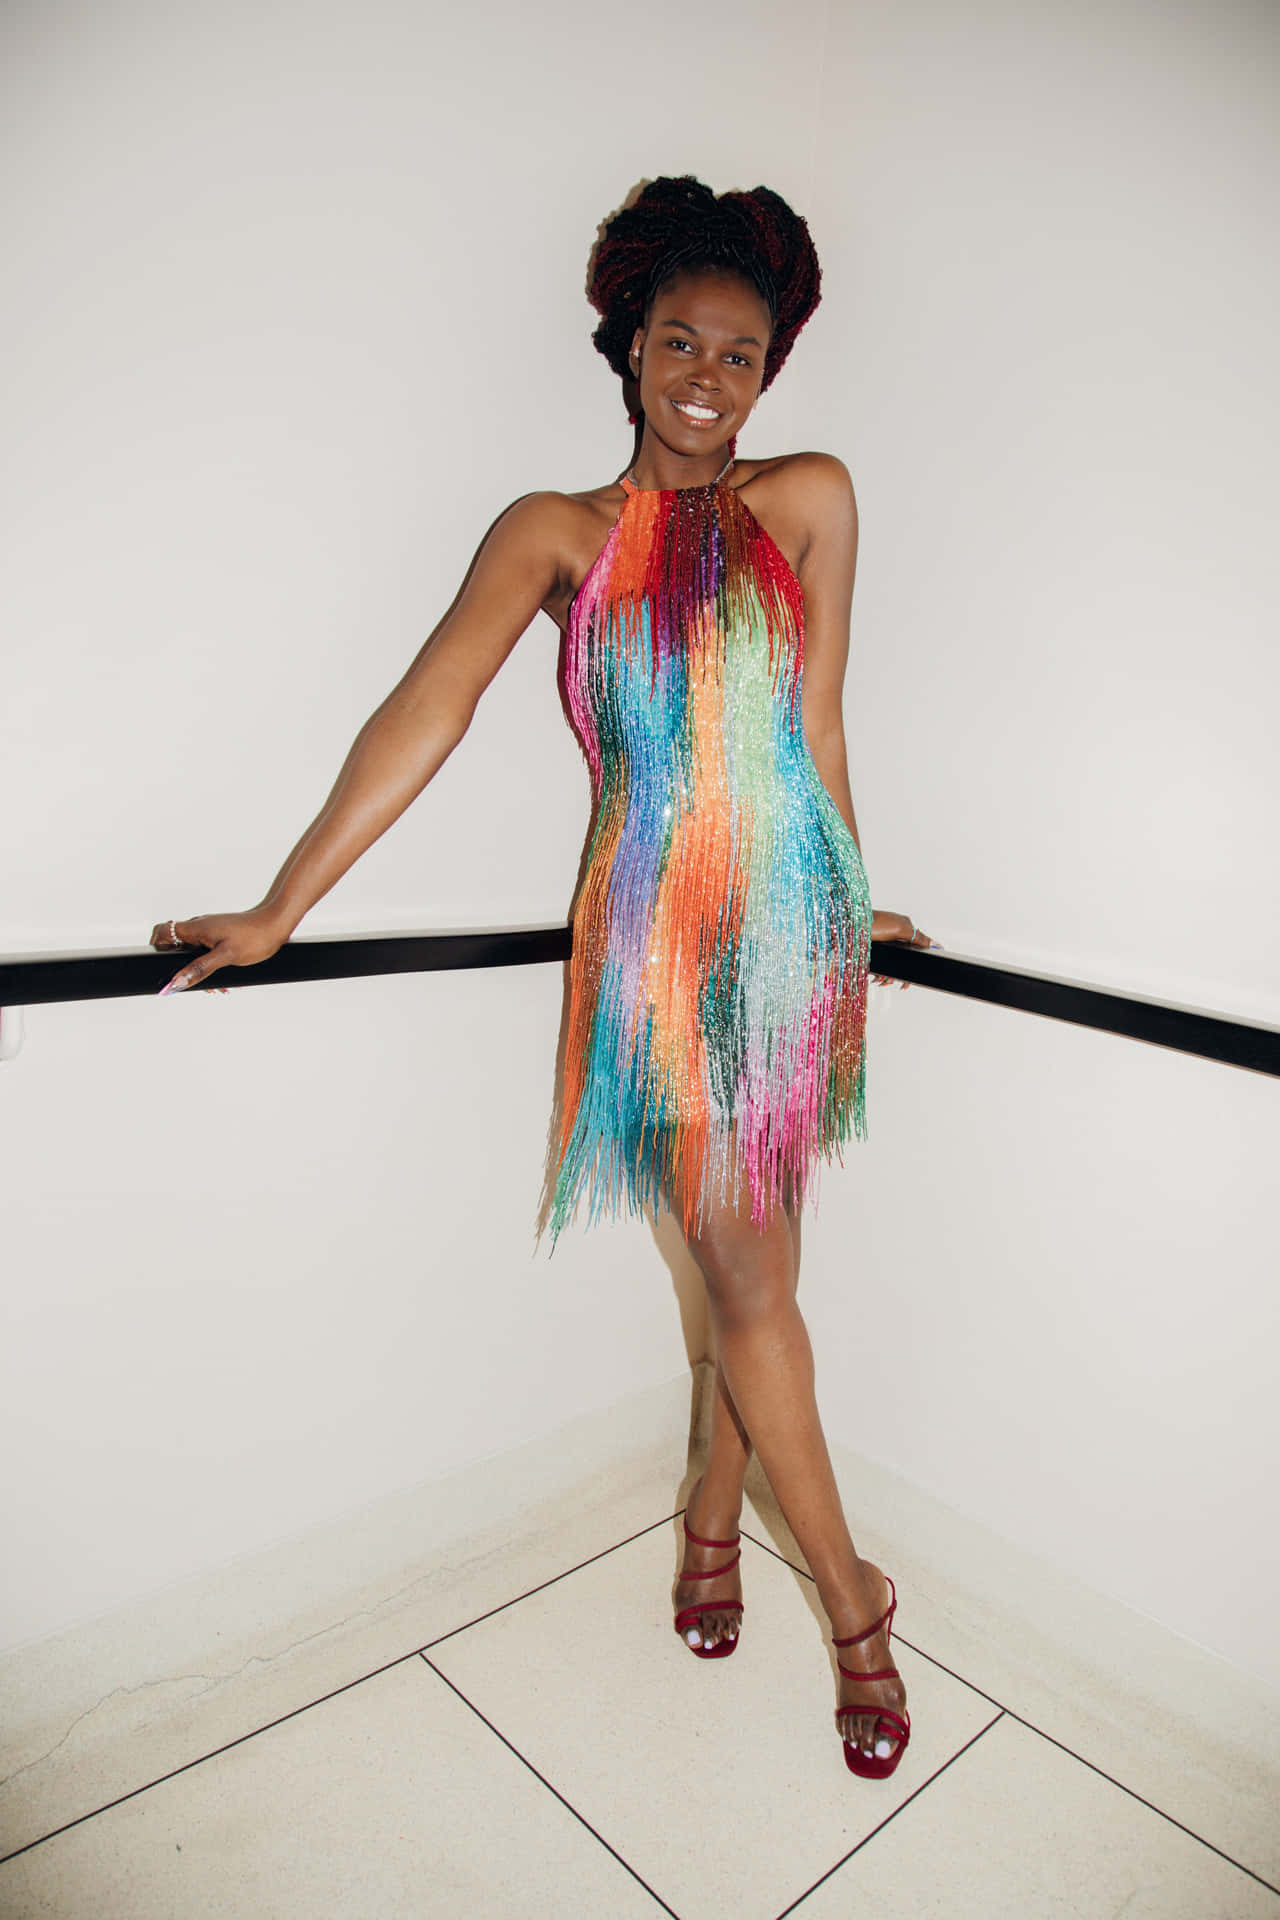 A Woman In A Colorful Dress Posing For A Photo